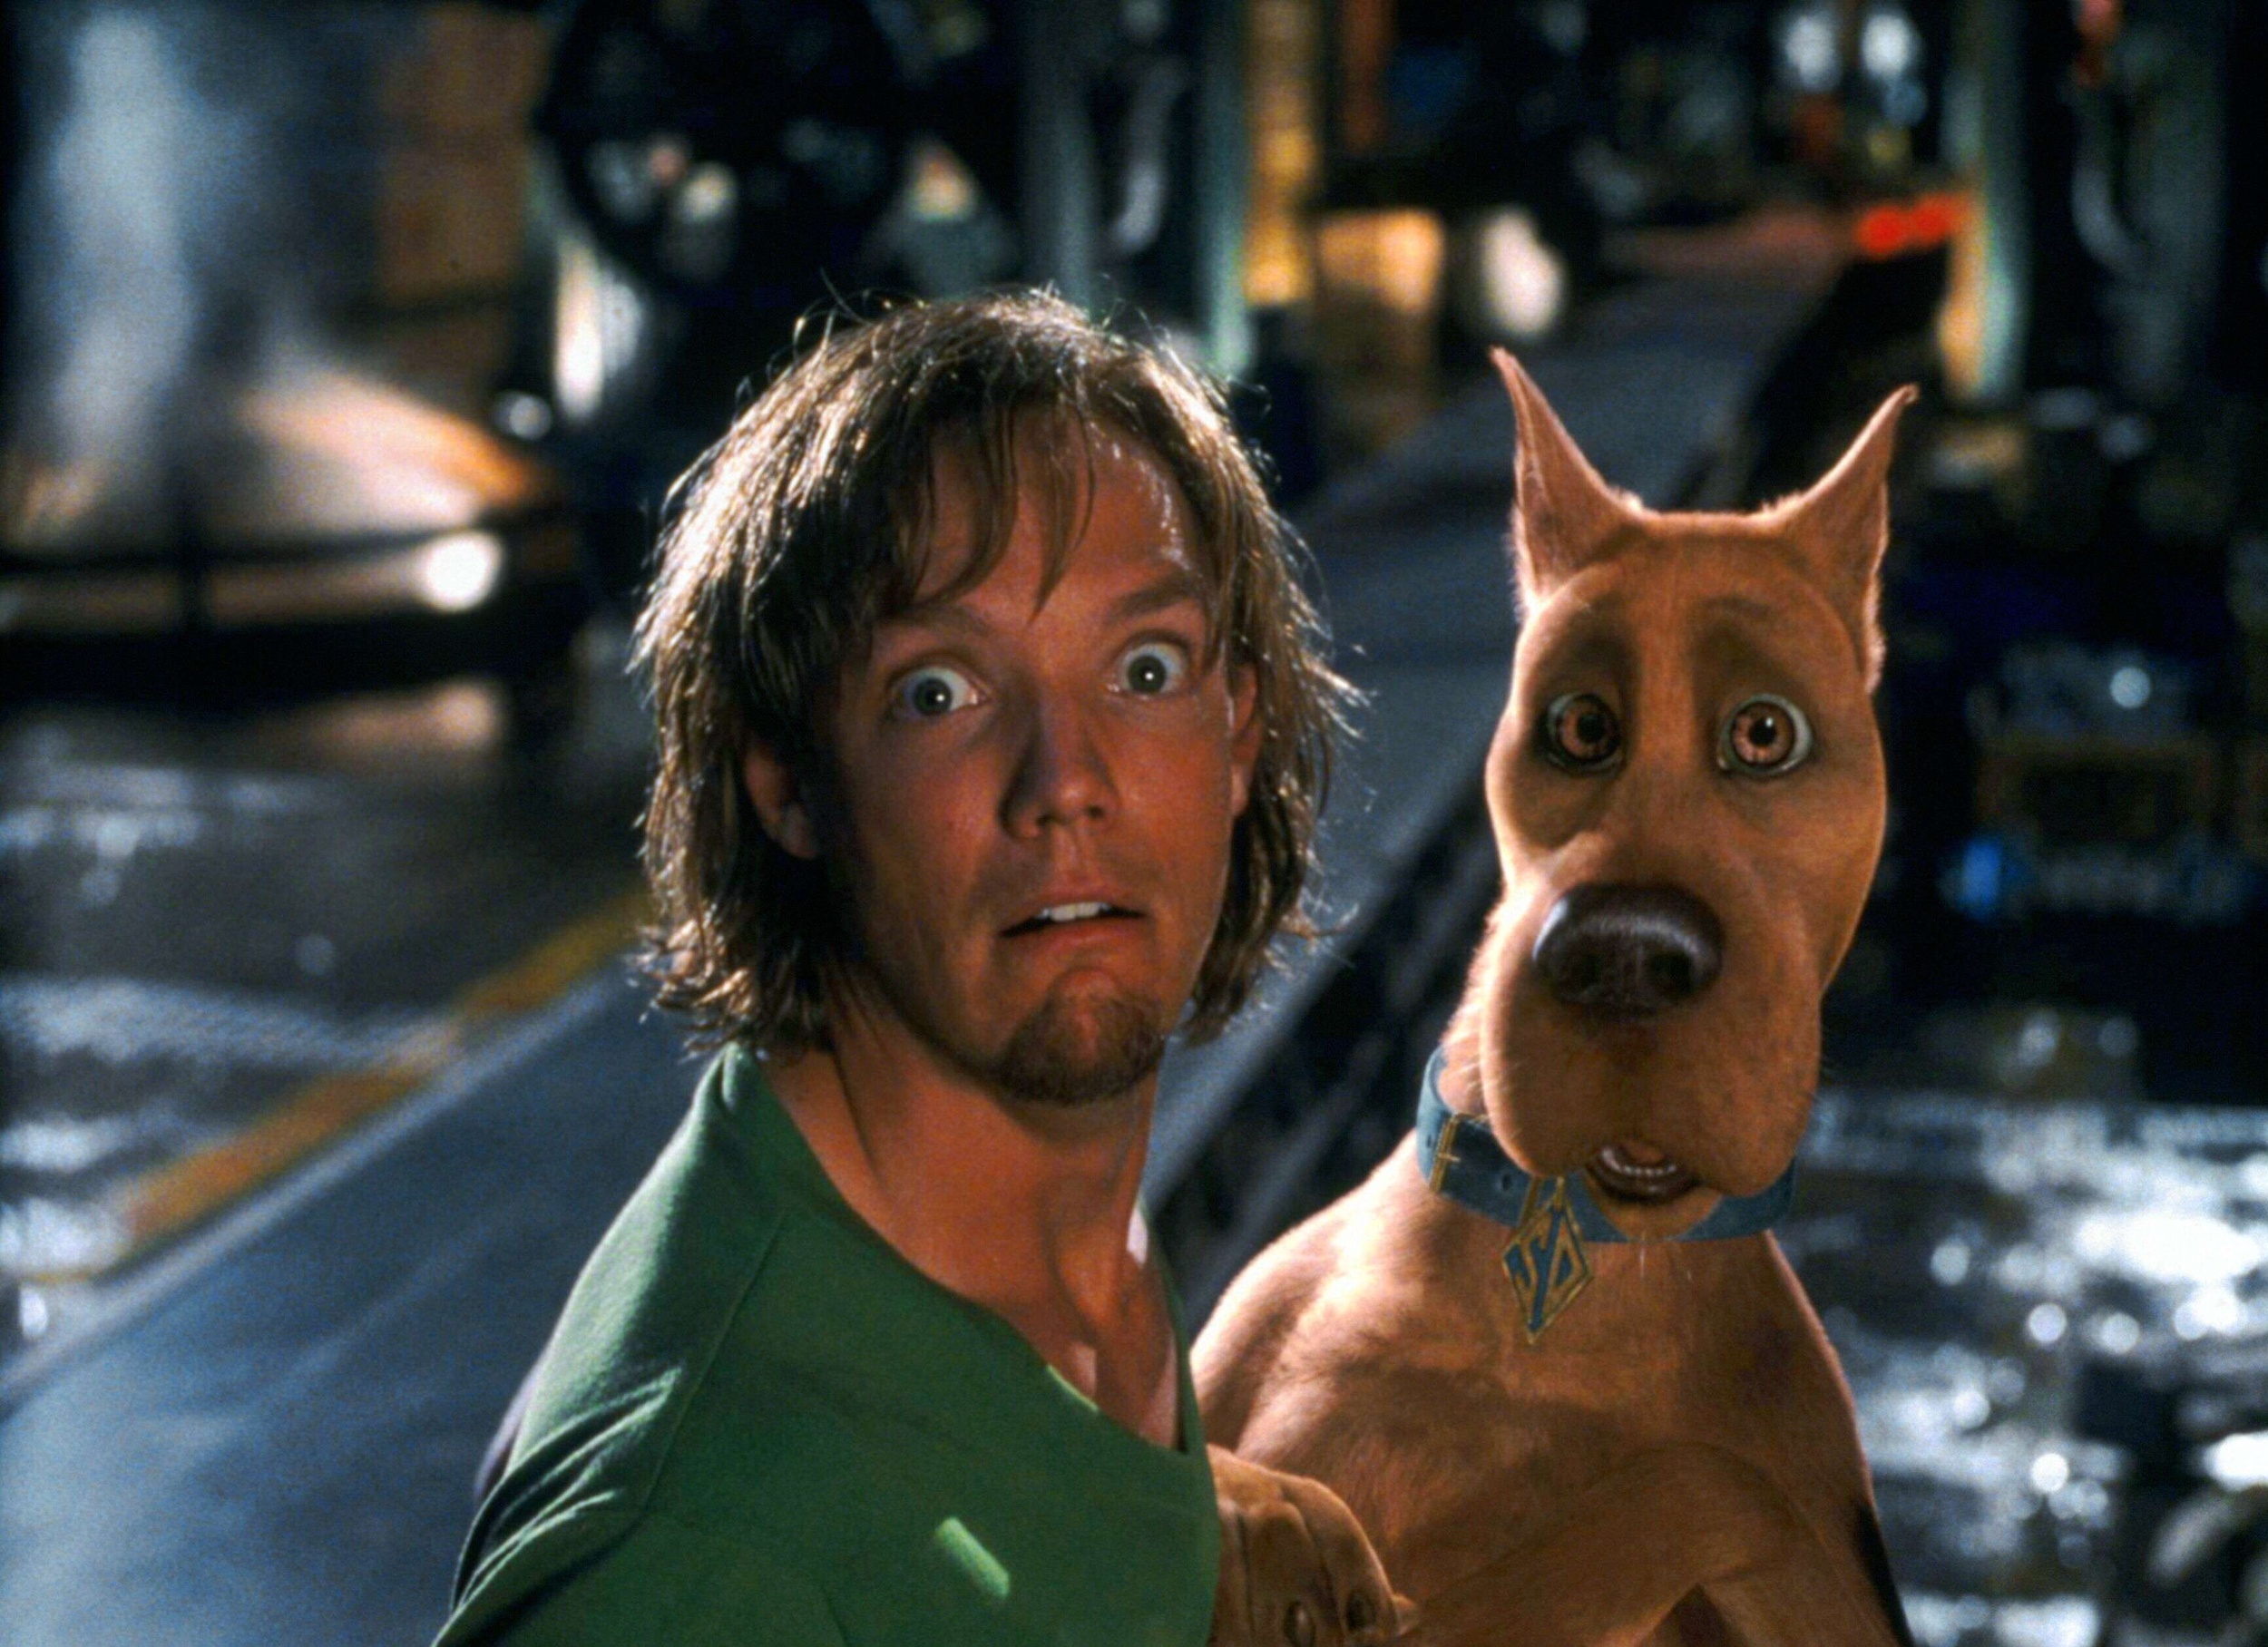 <p>Scooby-Doo has been on our TV screens for decades. He also has popped up in film a couple of times. The “Scooby-Doo” movies are a who’s who of 2000s actors like Sarah Michelle Gellar and Matthew Lillard, and the CGI hasn’t aged great, but the first movie still has its fun moments.</p><p>You may also like: <a href='https://www.yardbarker.com/entertainment/articles/the_15_best_isekai_anime_series_to_help_you_escape_real_life_092723/s1__38663425'>The 15 best isekai anime series to help you escape real life</a></p>